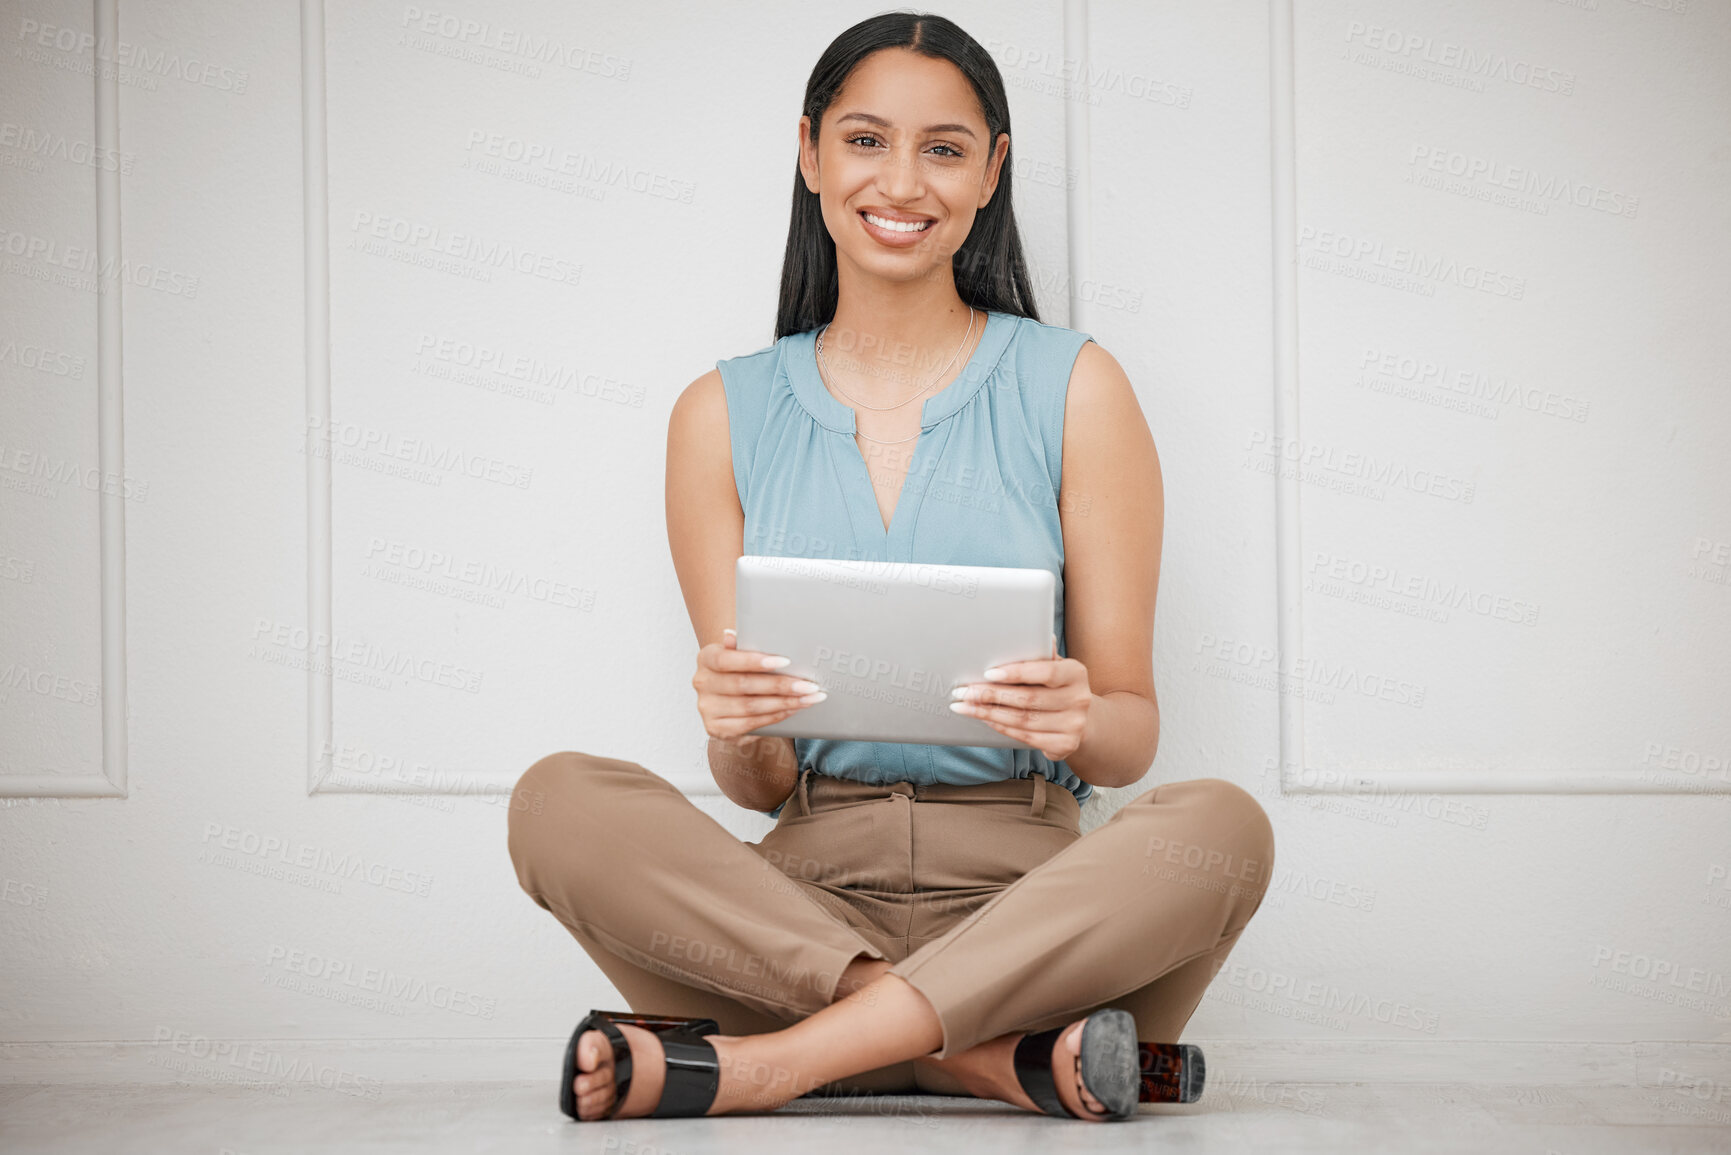 Buy stock photo Happy business woman, tablet and sitting on floor for online communication, networking or social media at office. Portrait of female person or employee smile with technology for research at workplace